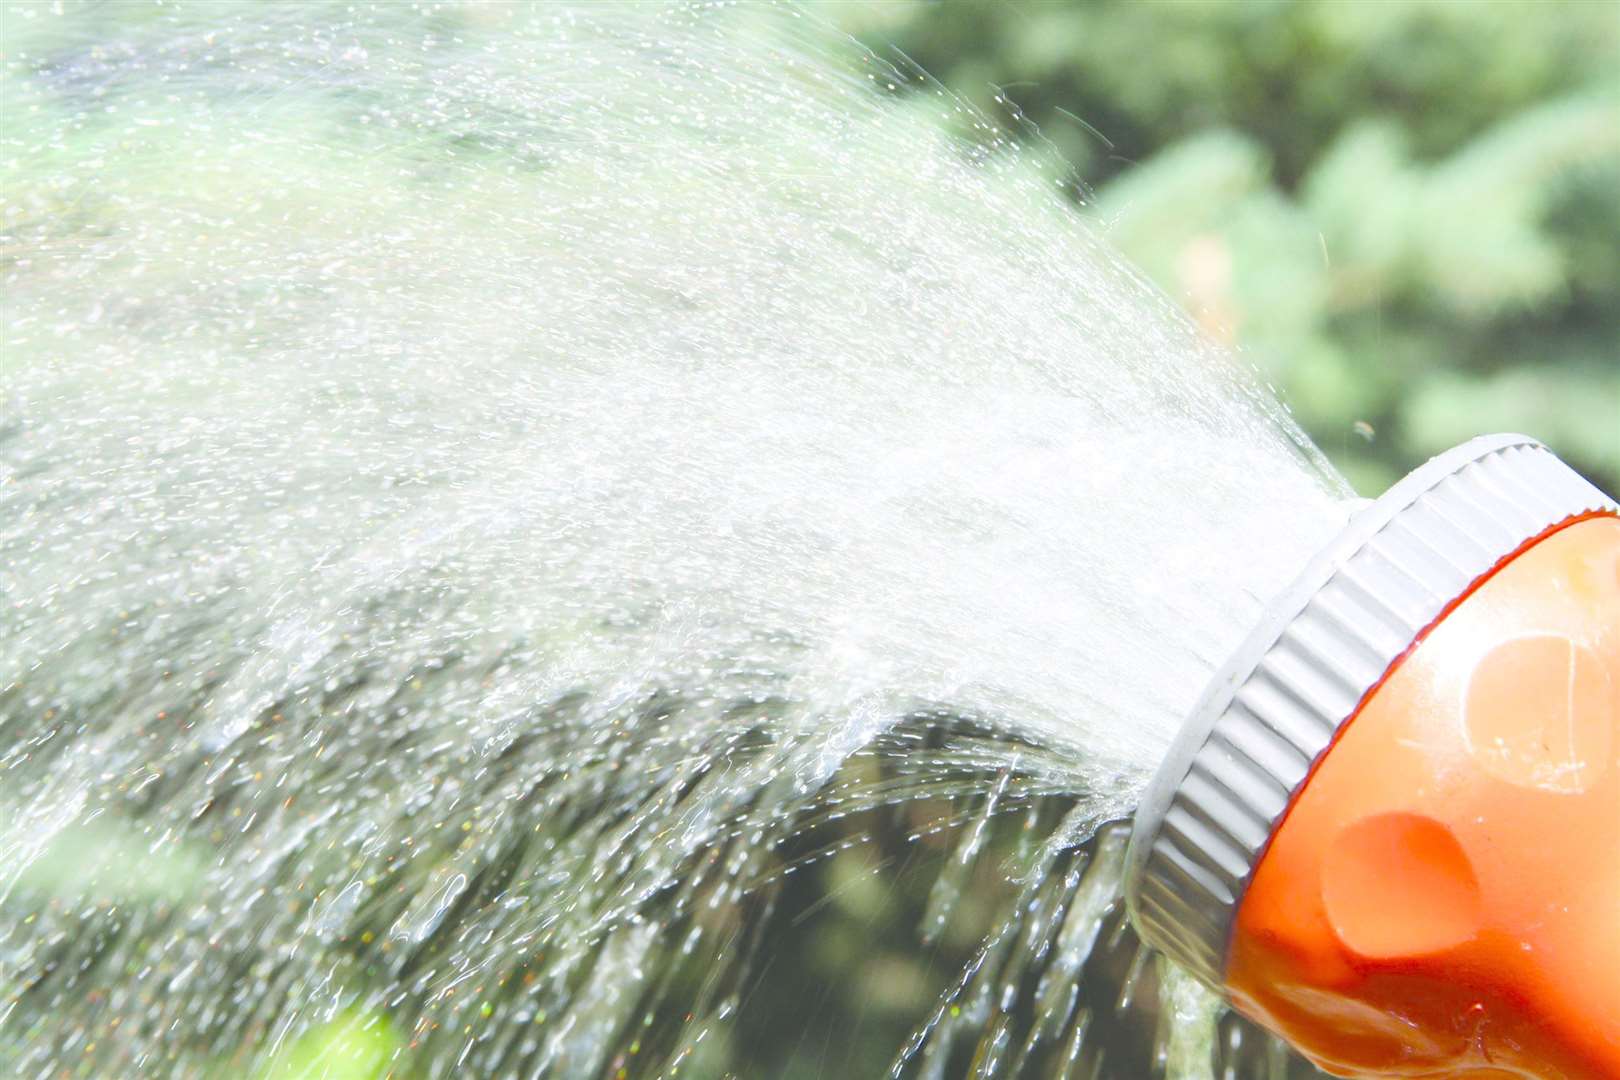 There was last a hosepipe ban in some parts of the UK in 2018